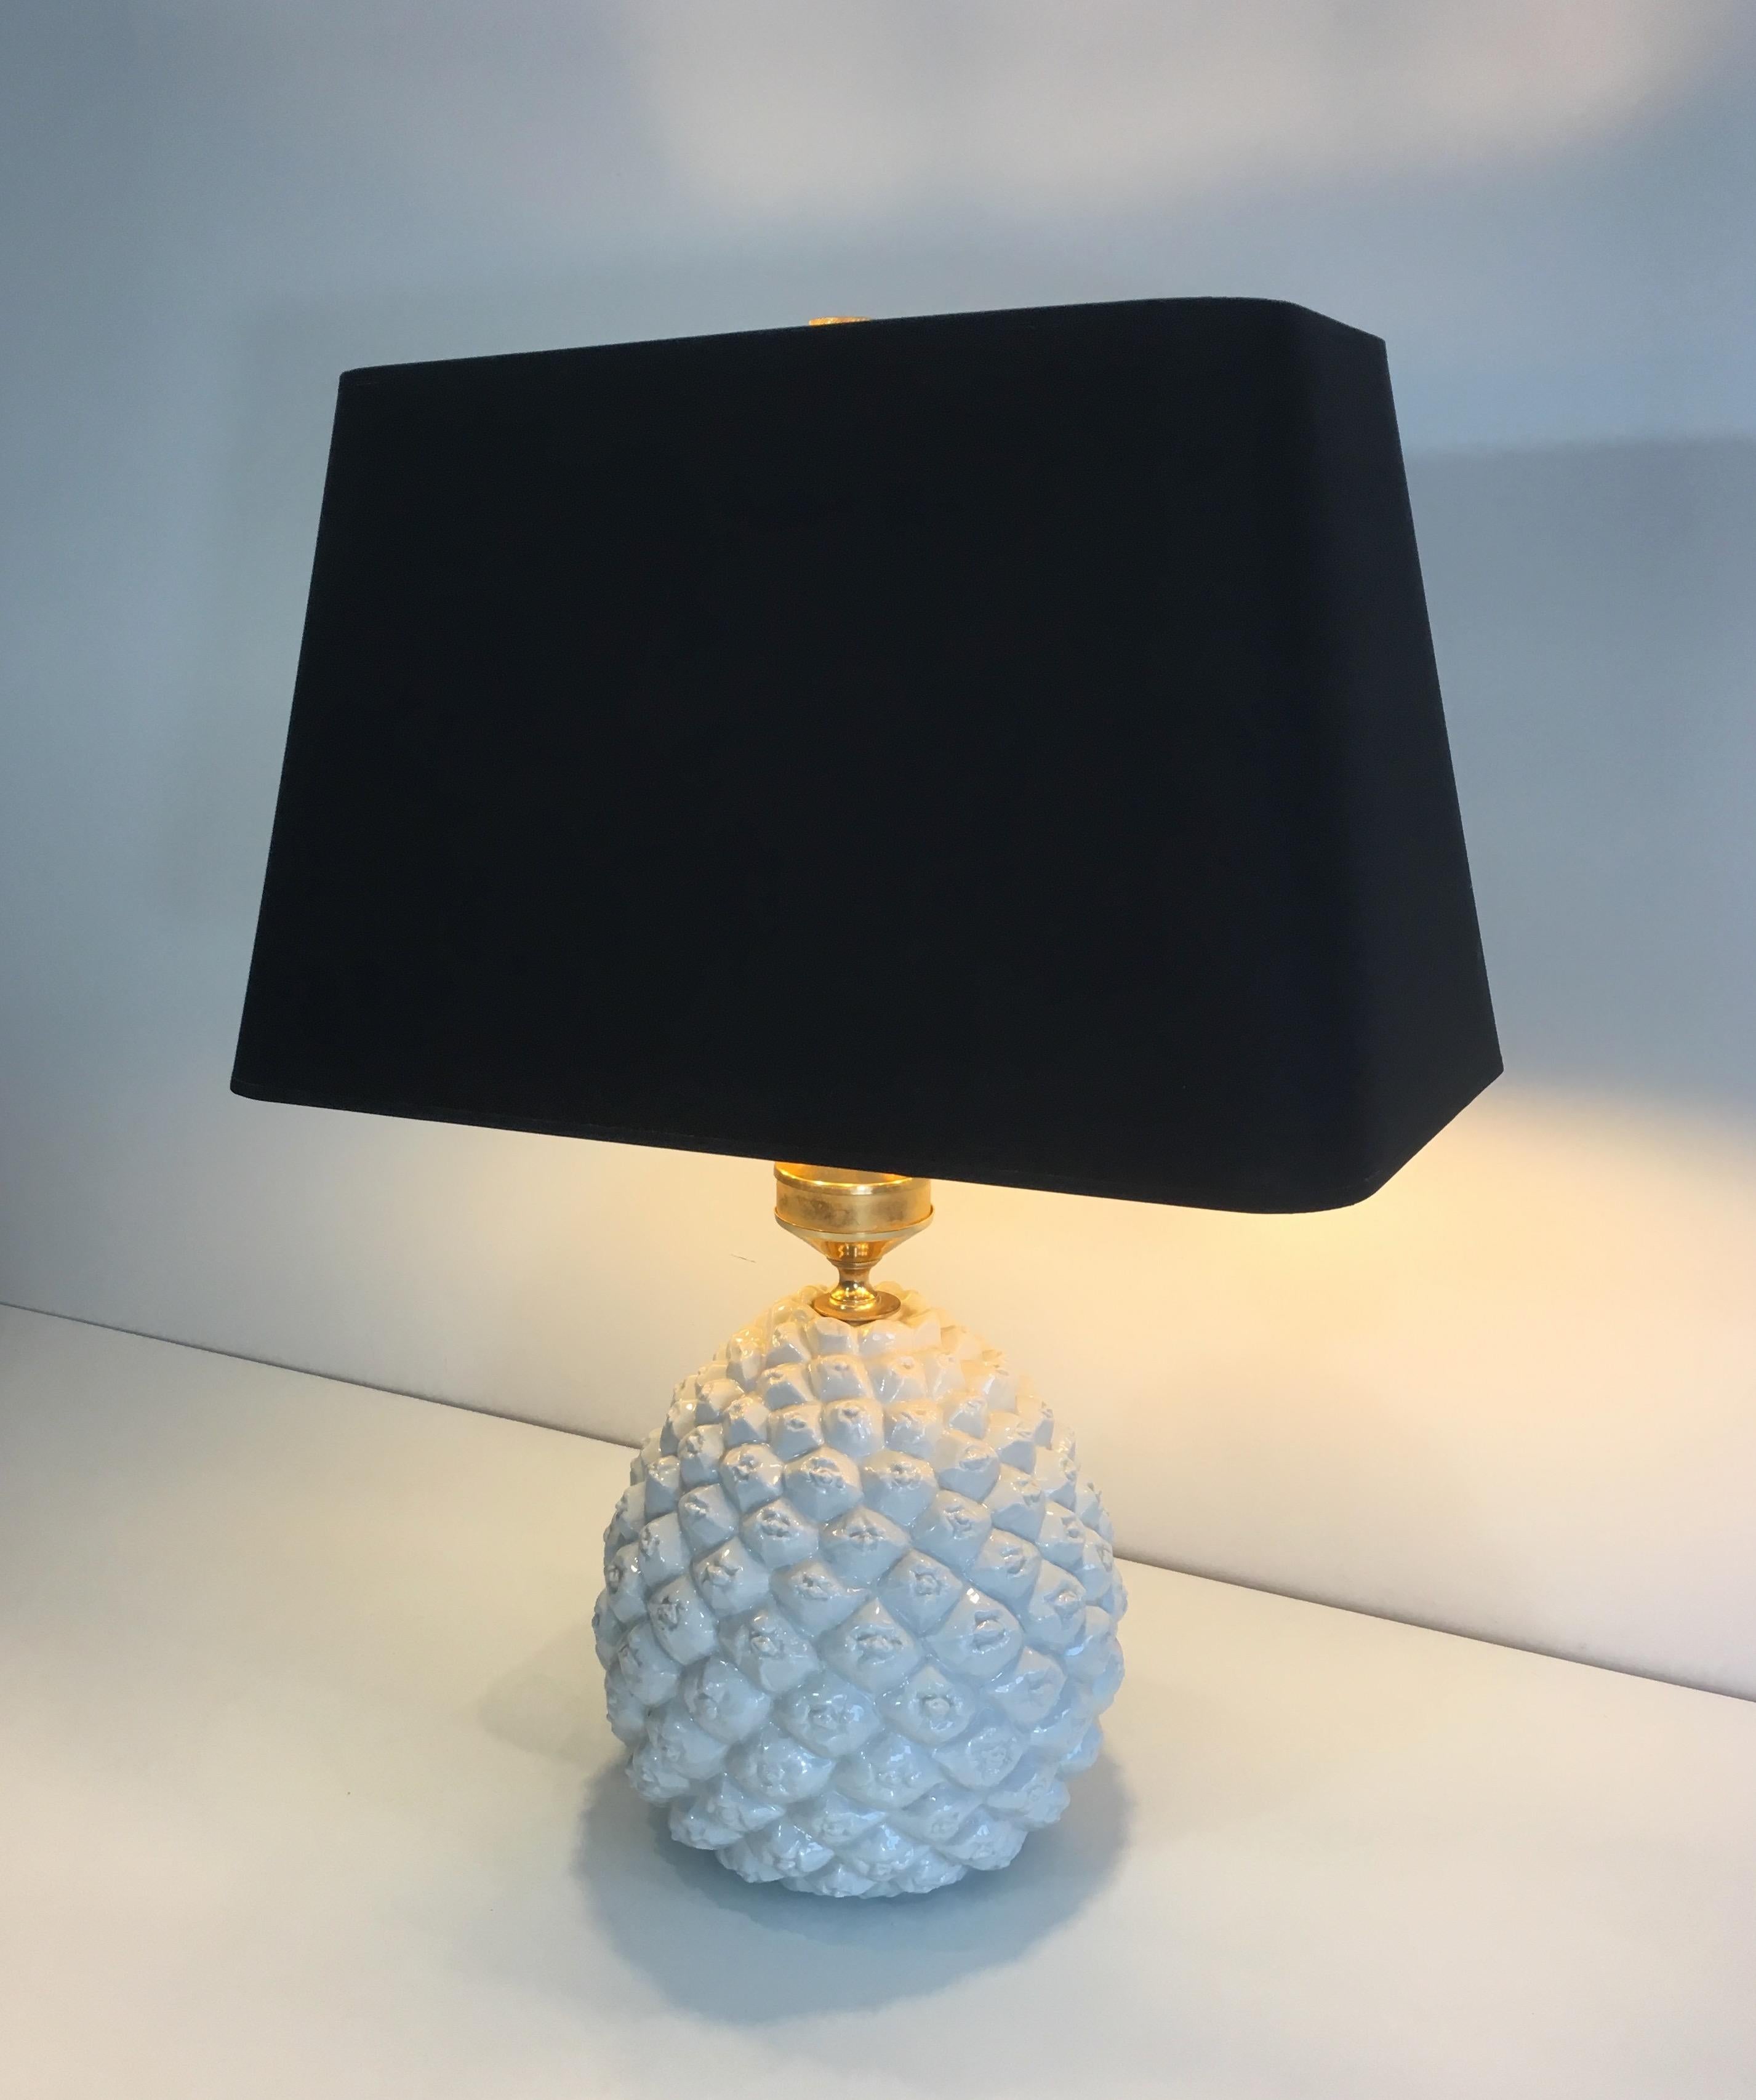 Design Pineapple Porcelain Table Lamp, Italy, circa 1970 For Sale 14